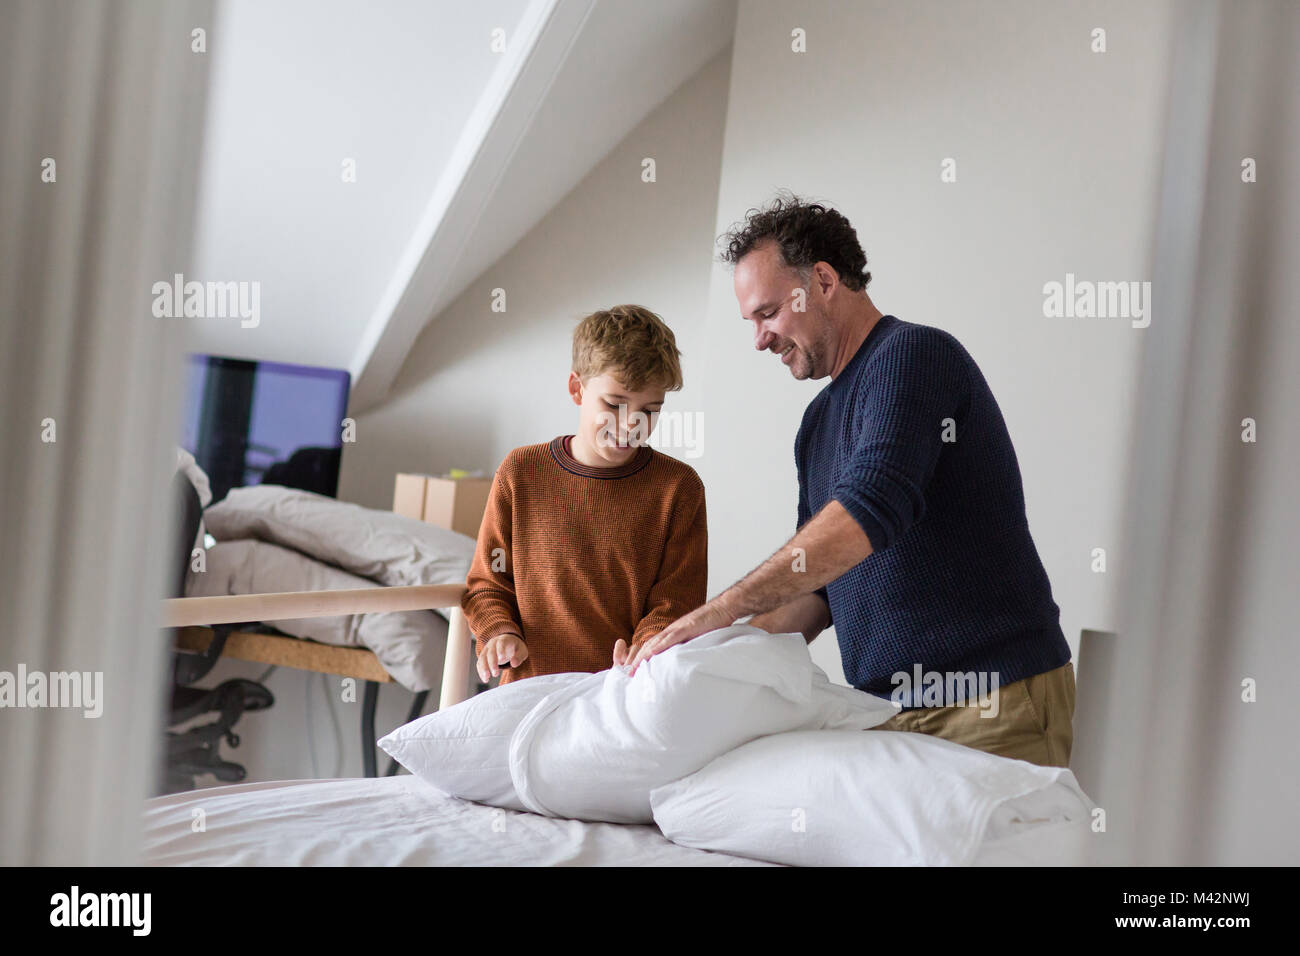 Father teaching Son how to make bed Stock Photo